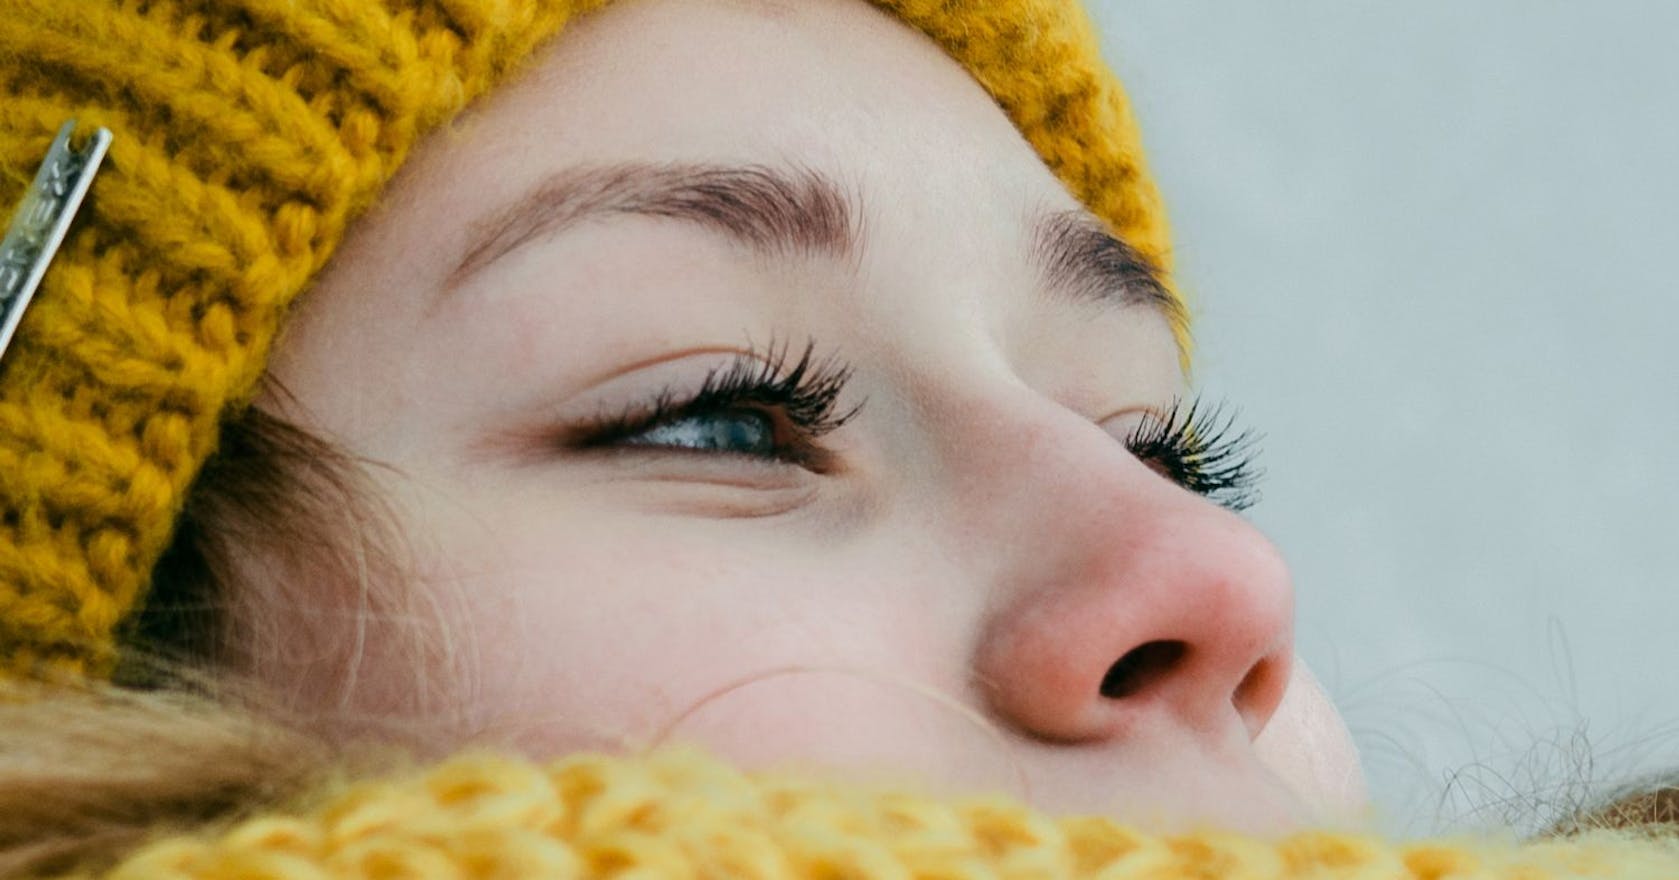 Your cold nose could be a sign that you’re working too hard